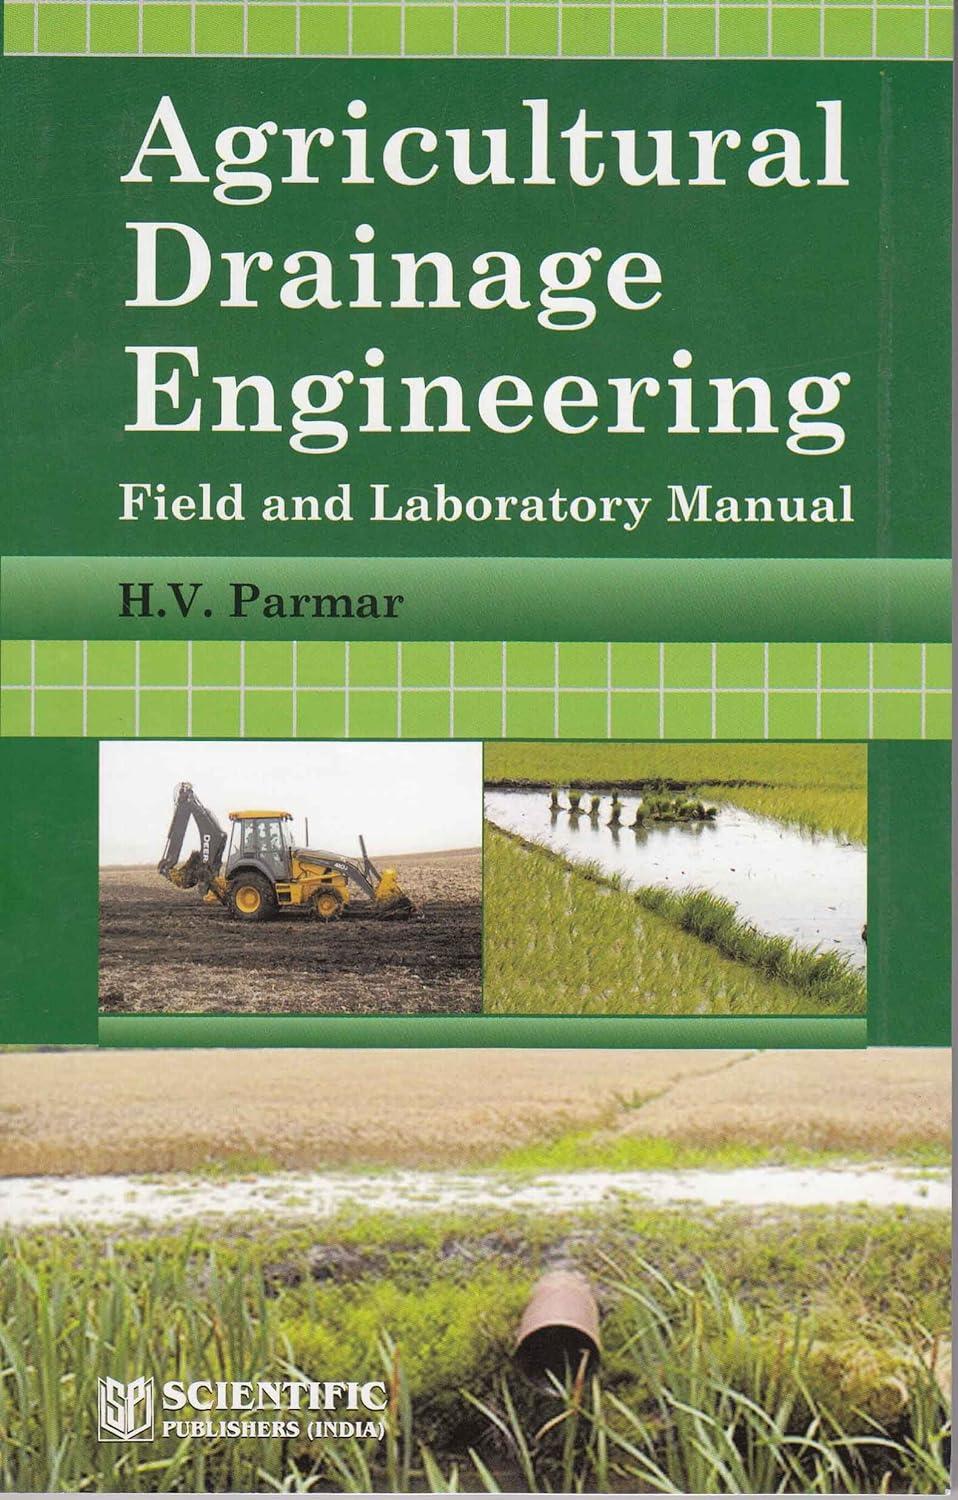 agricultural drainage engineering  field and laboratory manual 1st edition hiteshkumar v. parmar, scientific